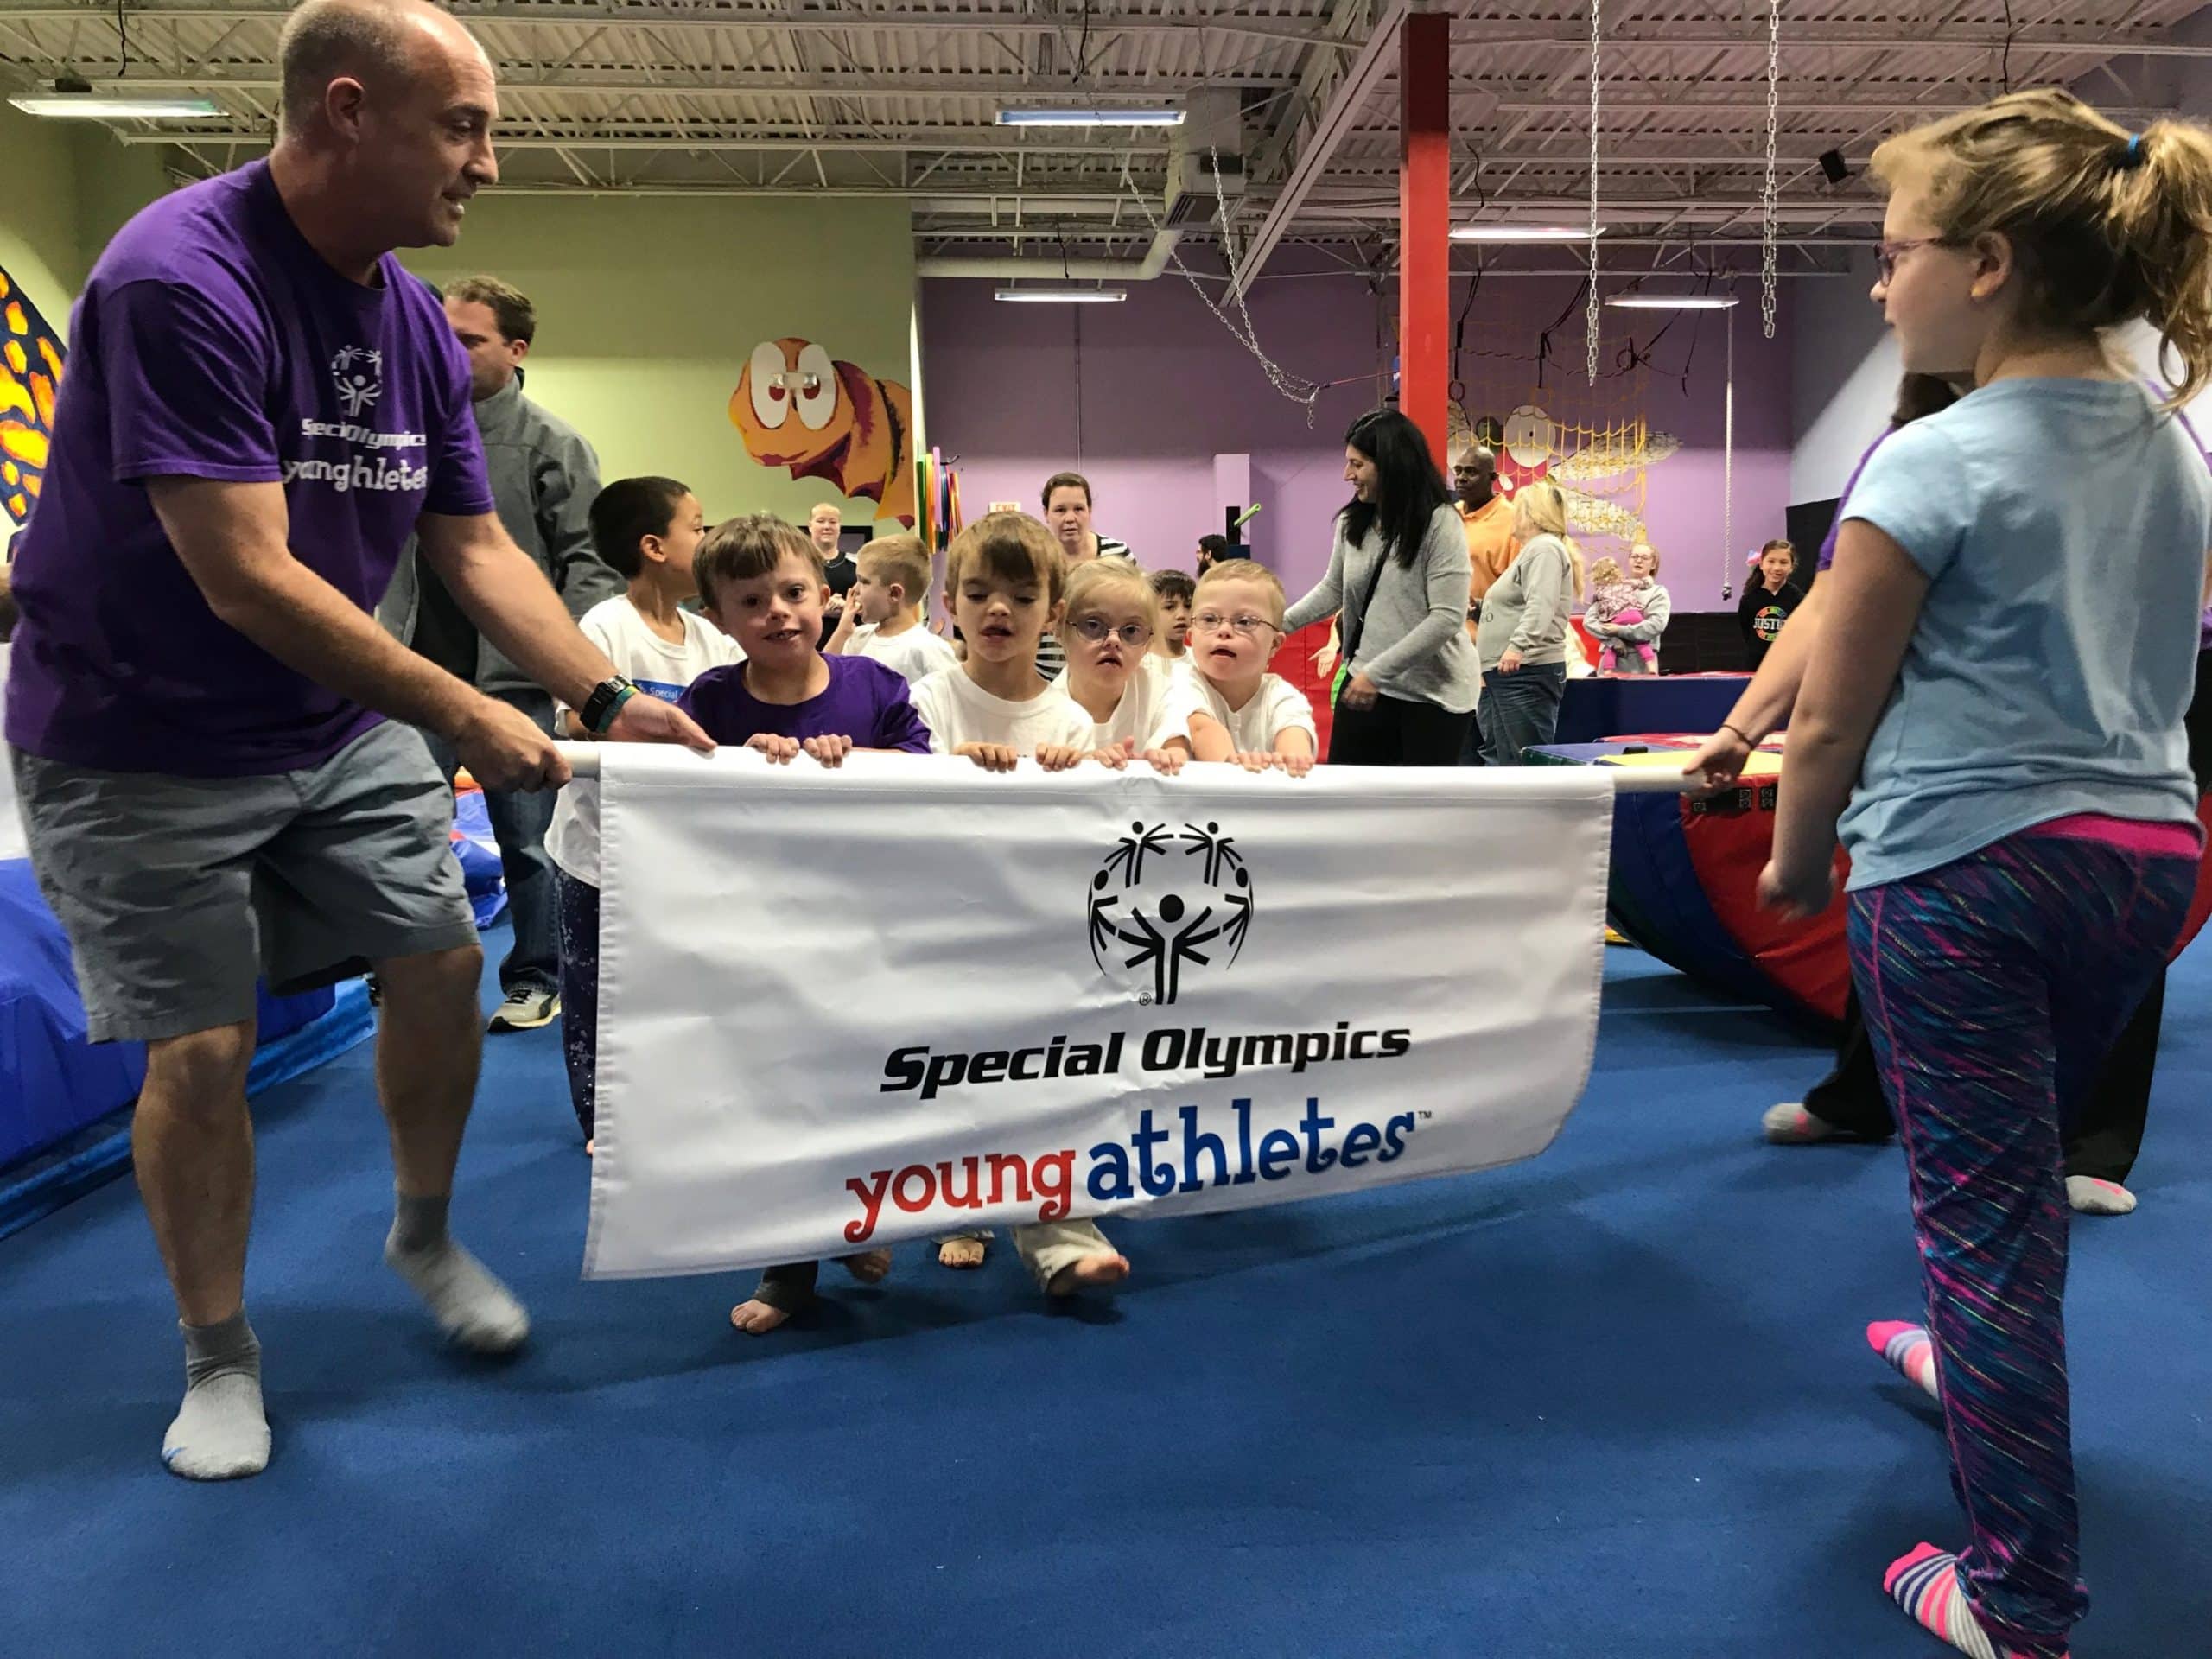 Young Athletes preparing for Special Olympics lost their training facility, but – Rolly Pollies stepped in!